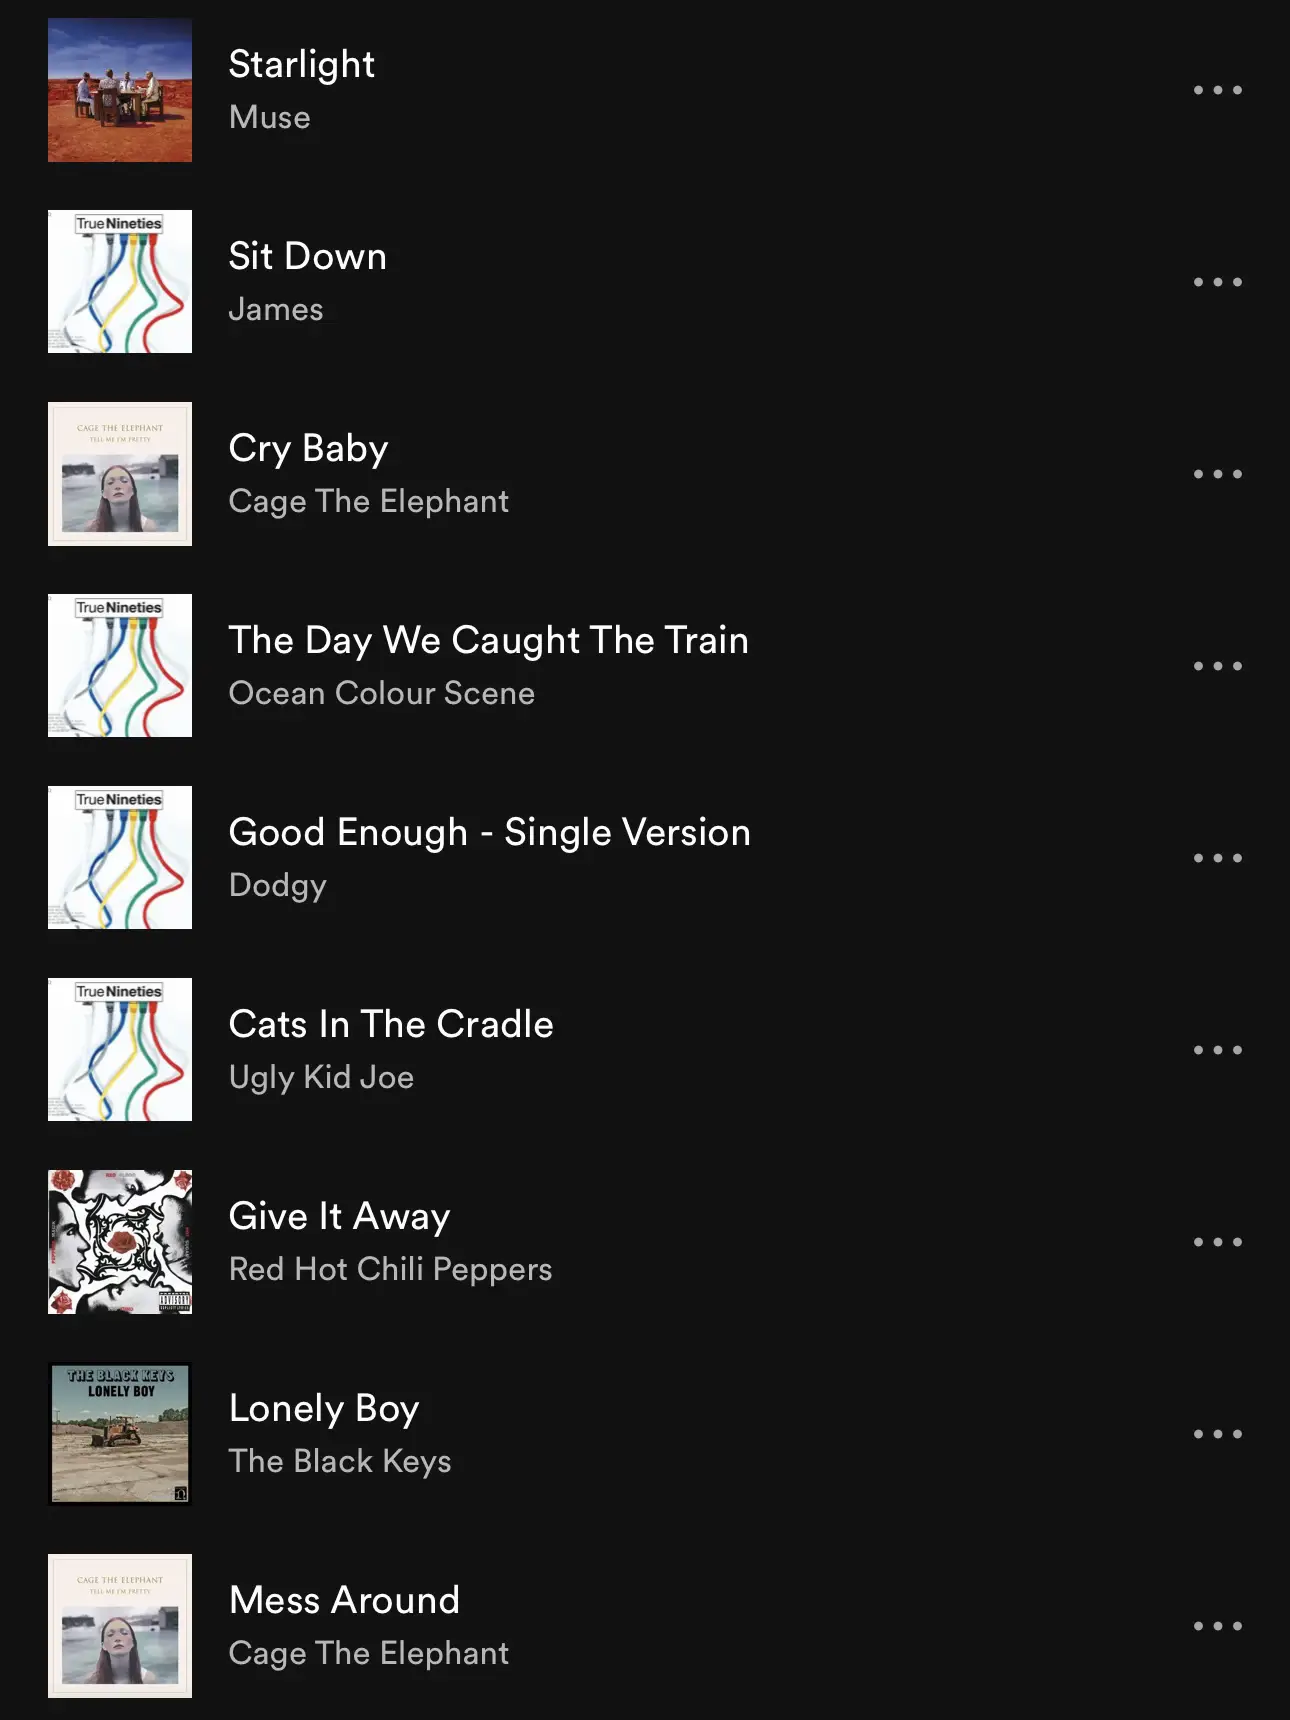  A list of songs with a picture of a train